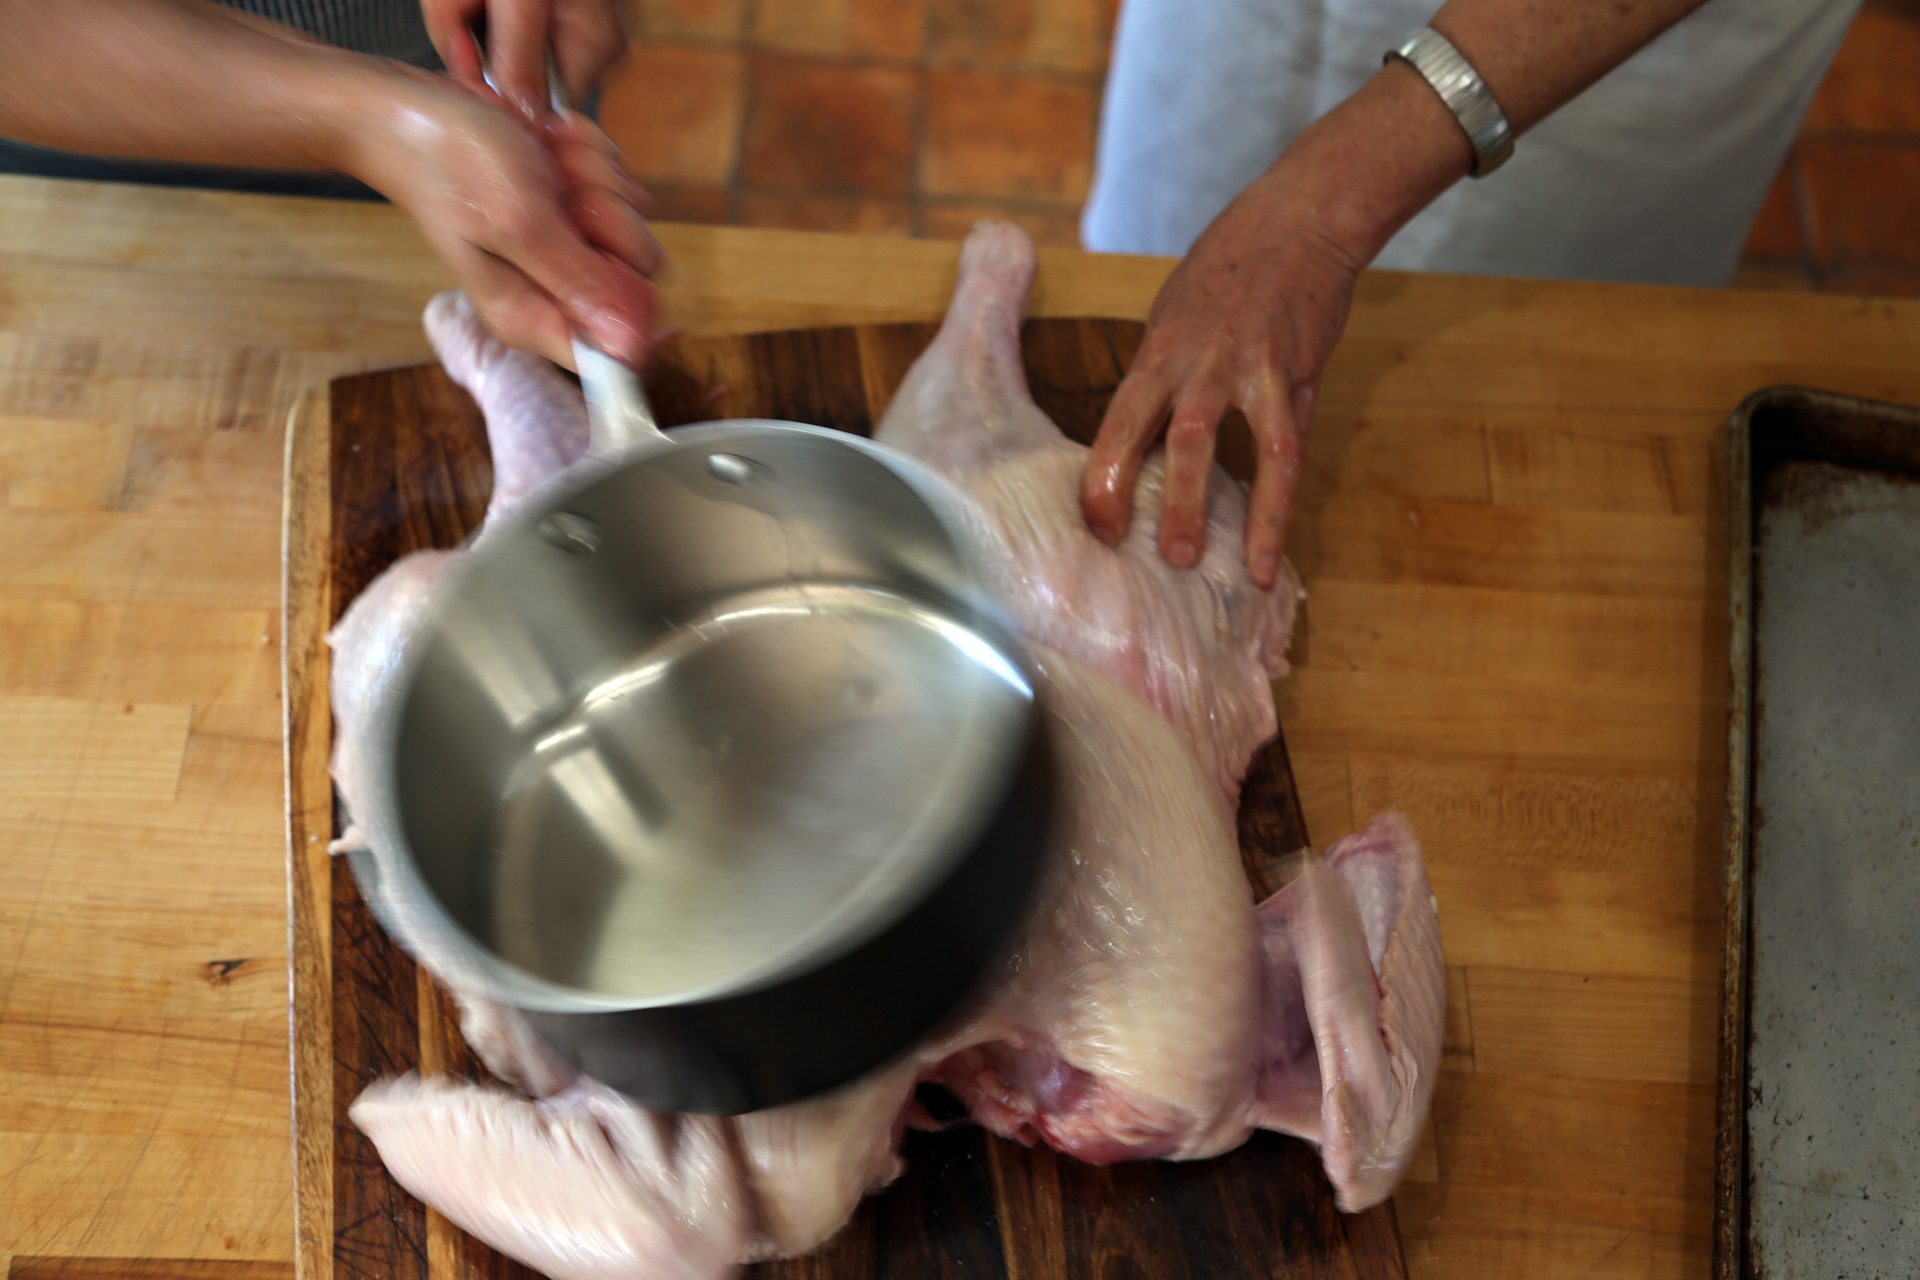 You can also use a heavy saucepan or cast iron pan to flatten the bird.